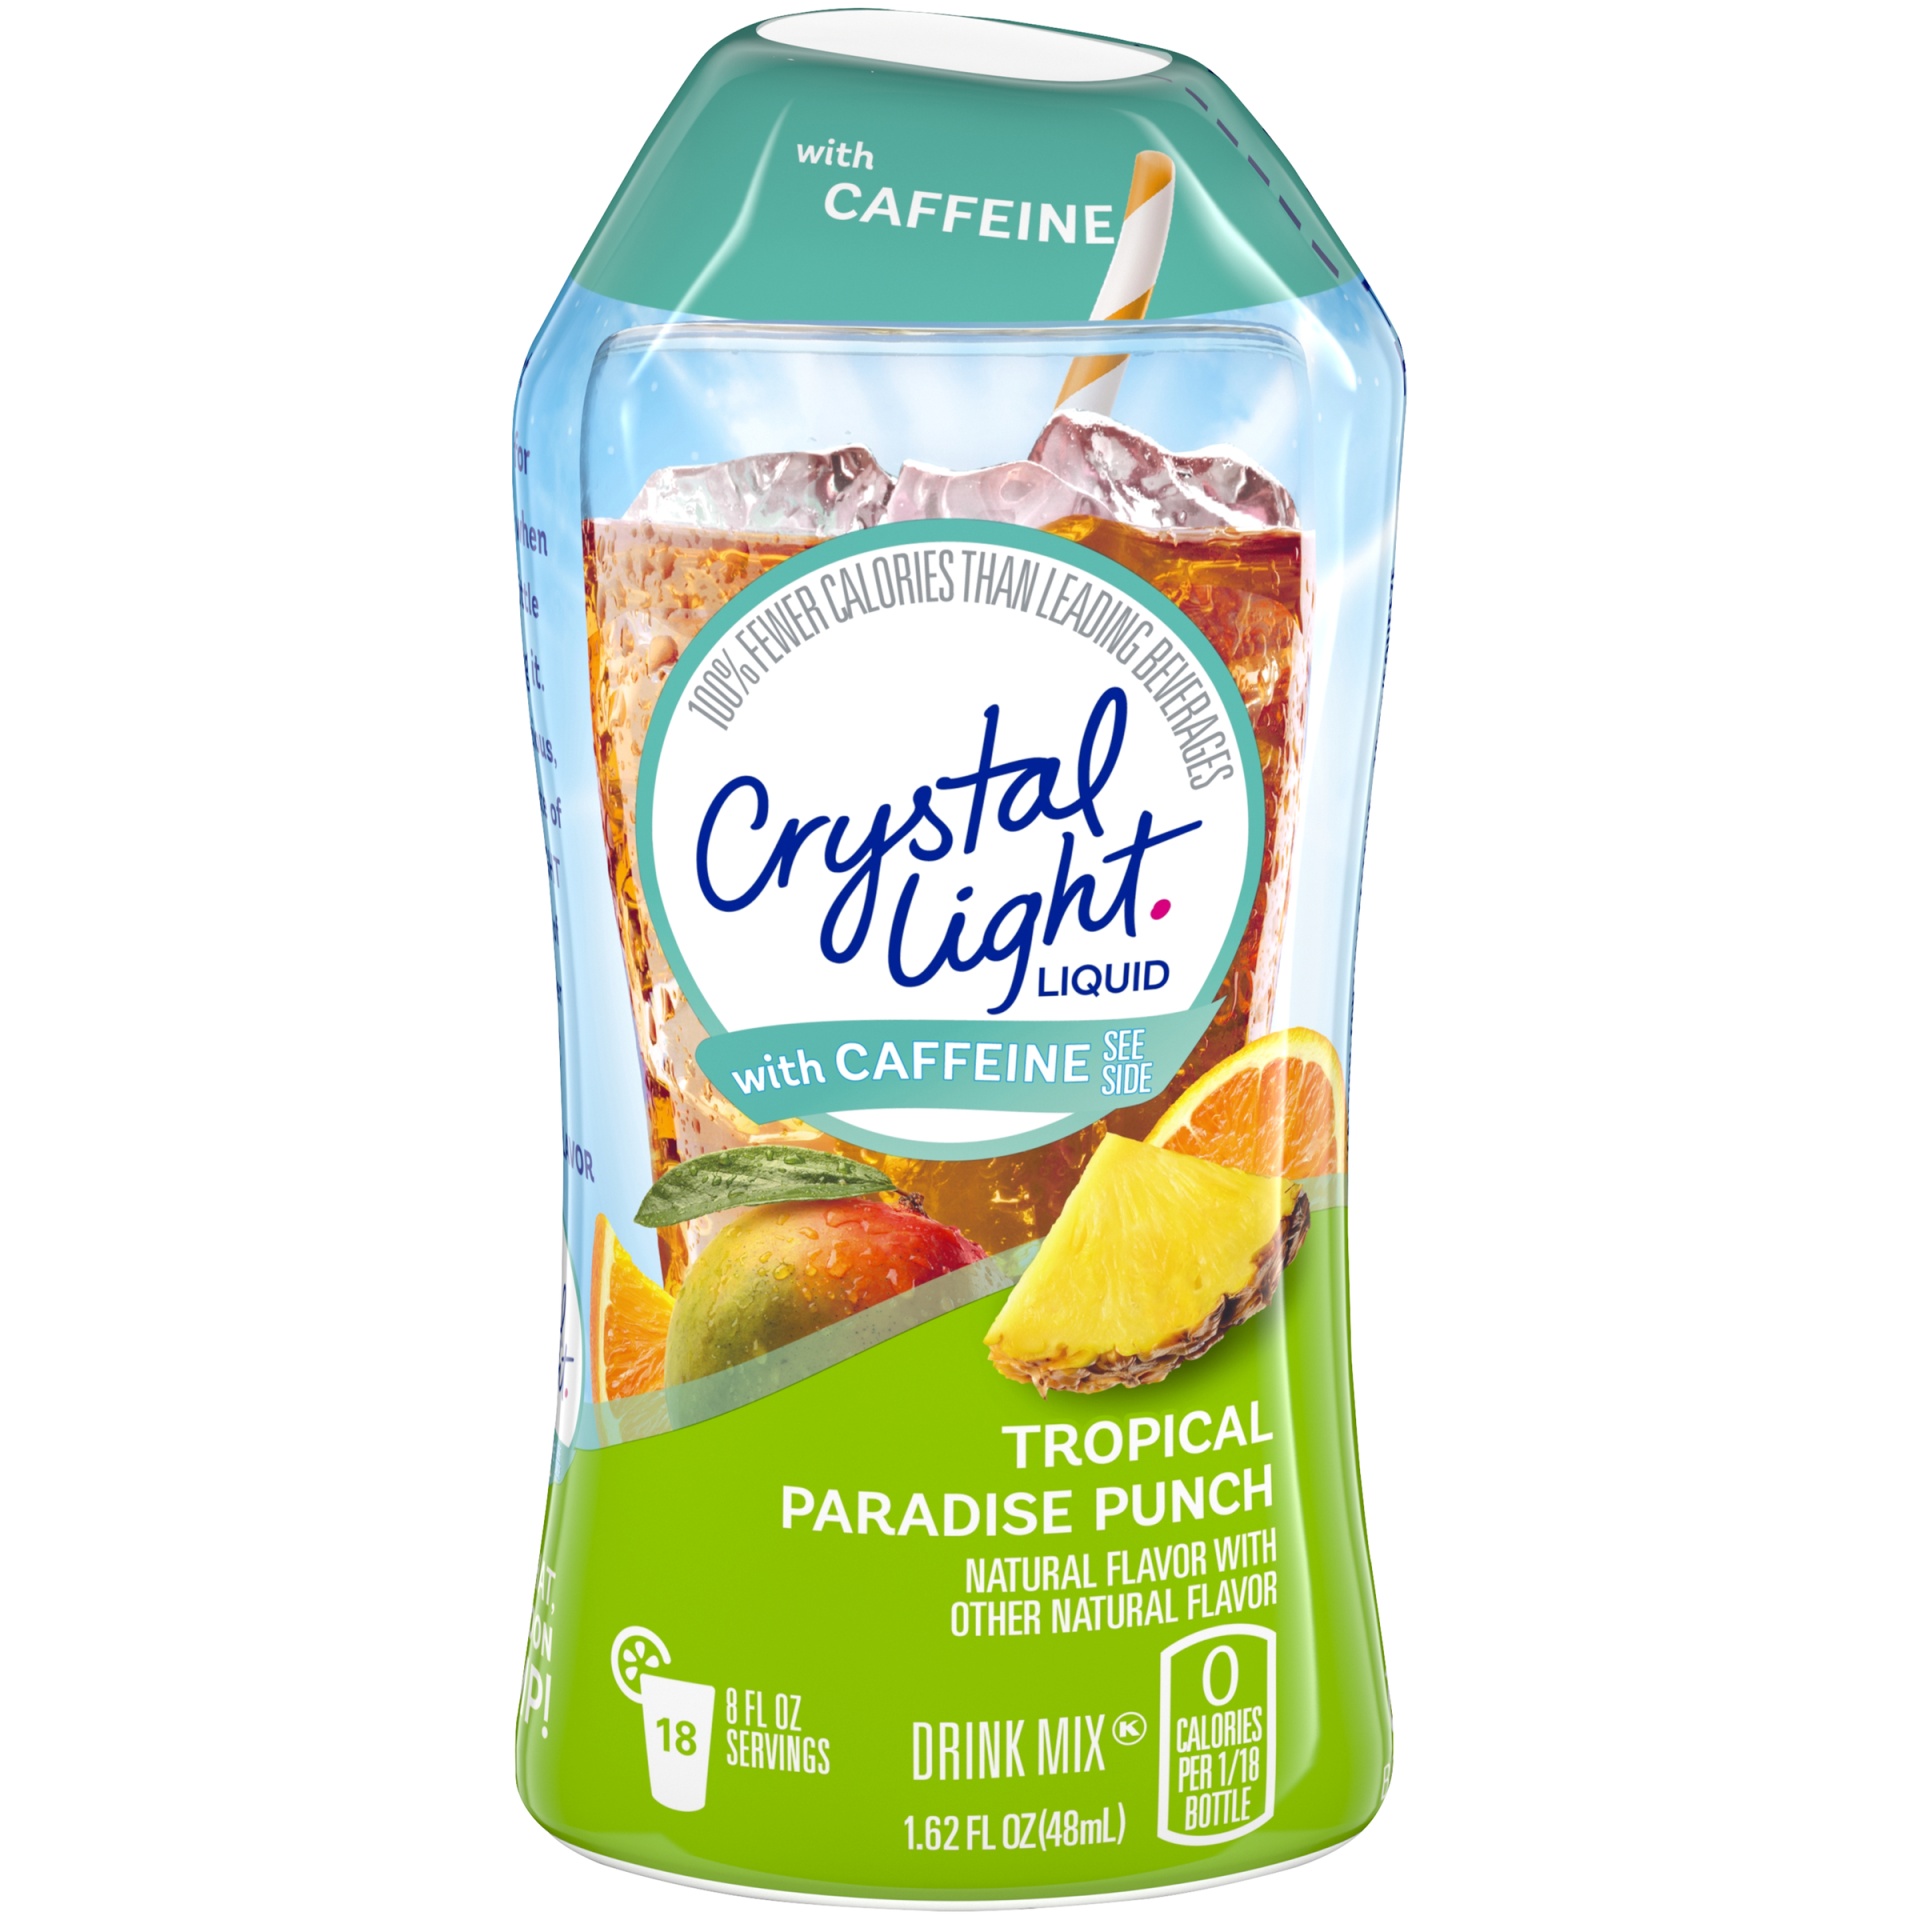 slide 1 of 7, Crystal Light Liquid Tropical Paradise Punch Naturally Flavored Drink Mix with Caffeine, 1.62 fl oz